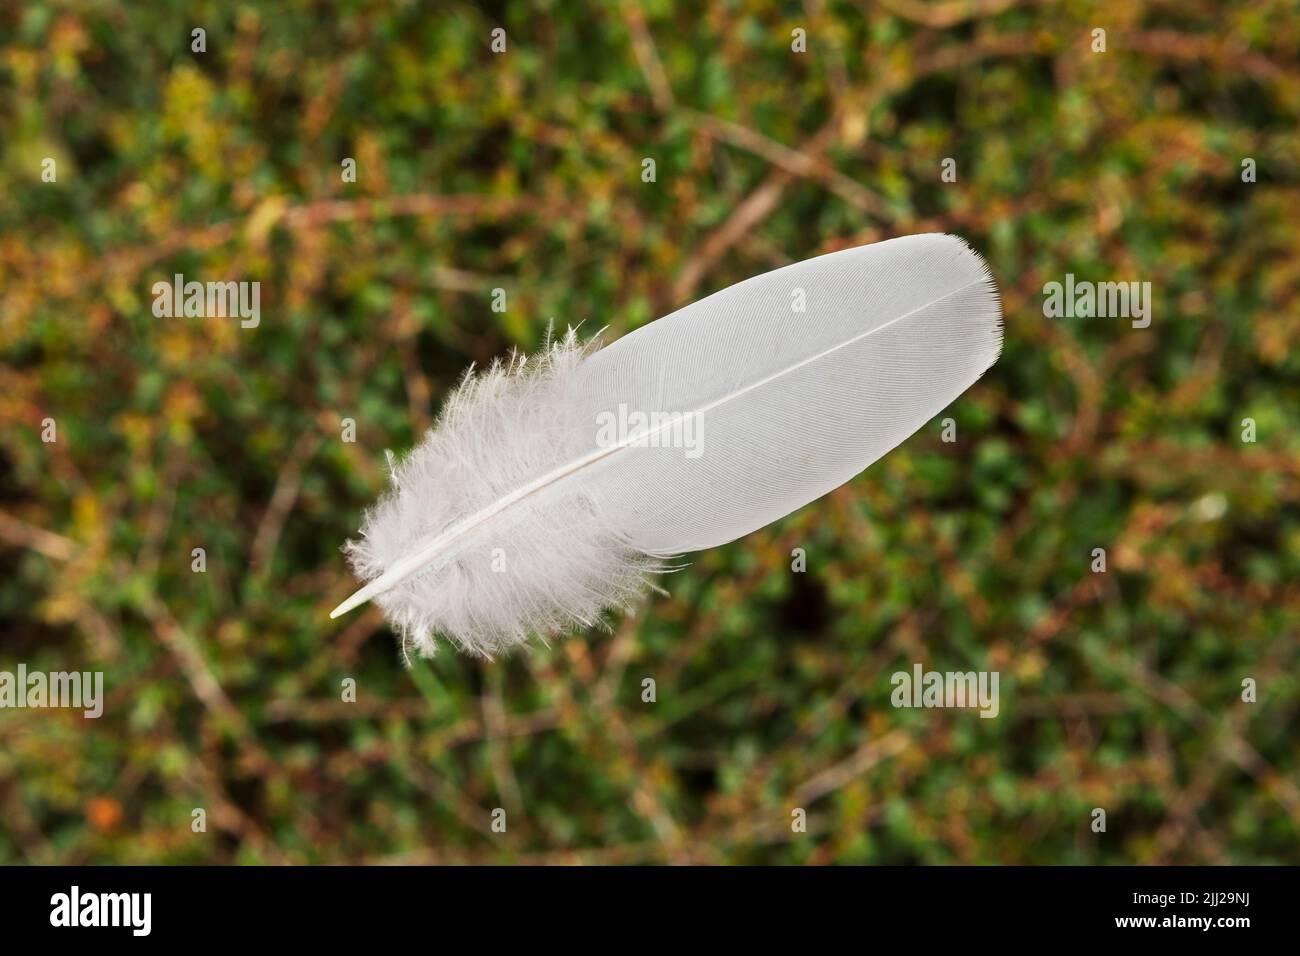 Delicate white feathers with background of out of focus leaves Stock Photo